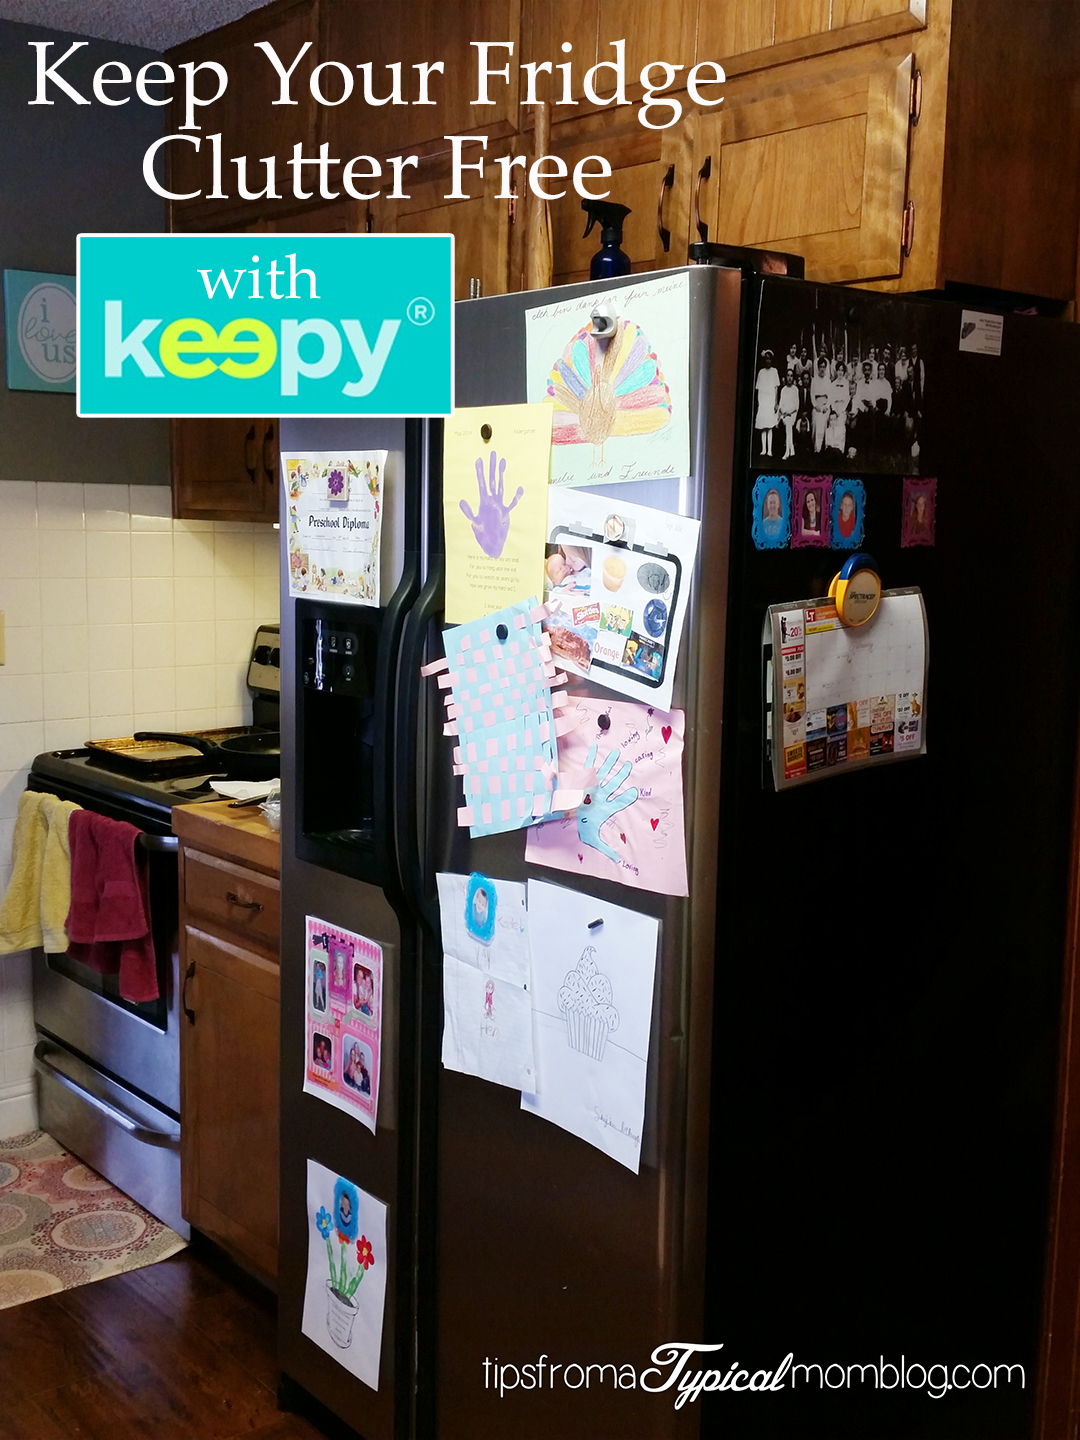 Keep Your Fridge Clutter Free with the Keepy App